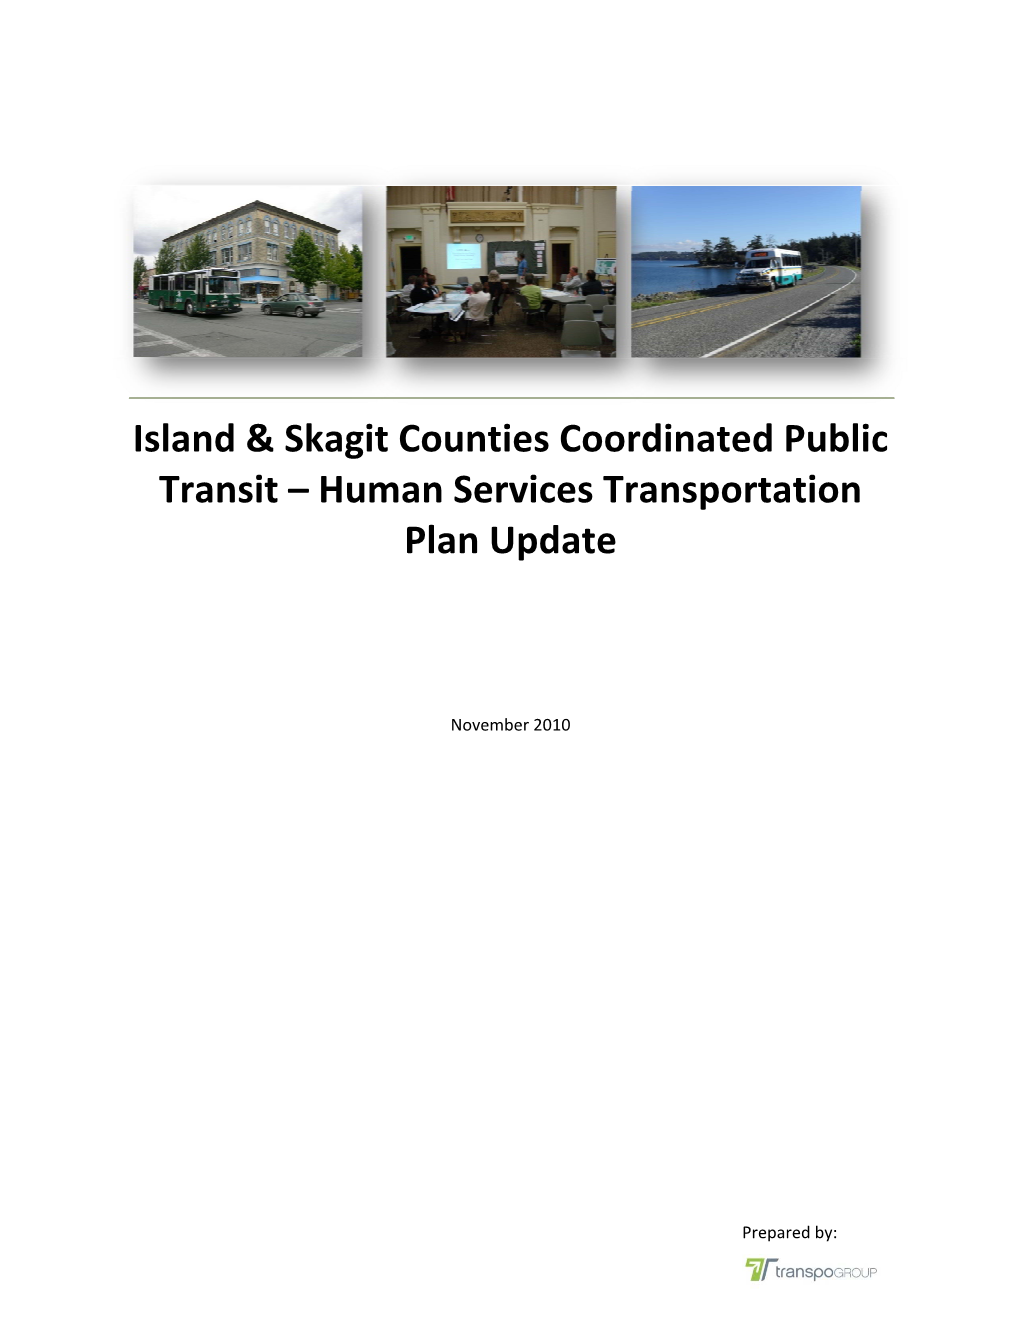 Island & Skagit Counties Coordinated Public Transit – Human Services